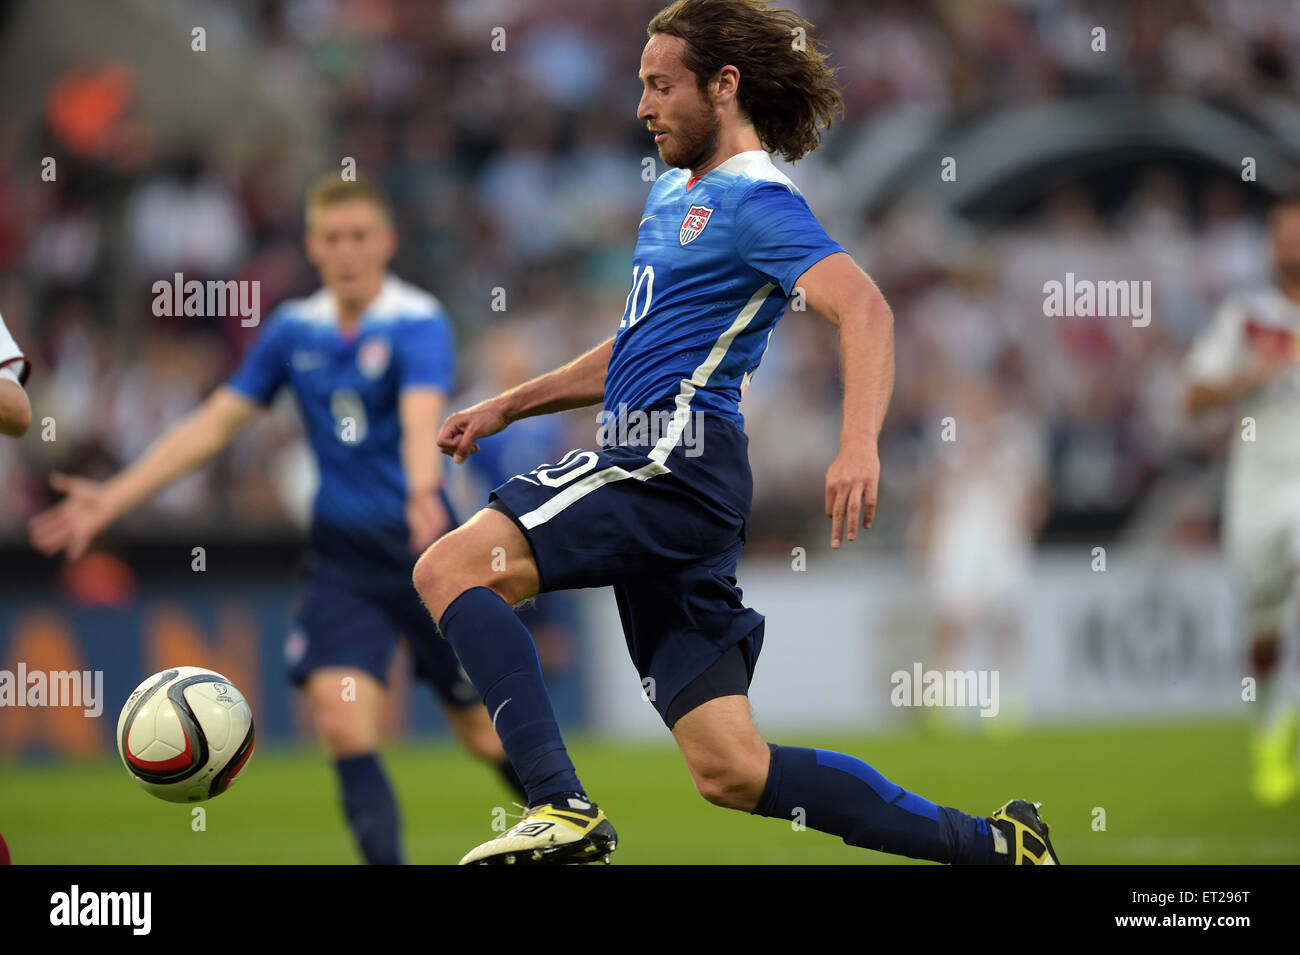 Cologne, Germany. 10th June, 2015. The USA's Mix Diskerud in action during the international soccer match between Germany and the USA in the RheinEnergie Stadium in Cologne, Germany, 10 June 2015. Photo: Federico Gambarini/dpa/Alamy Live News Stock Photo